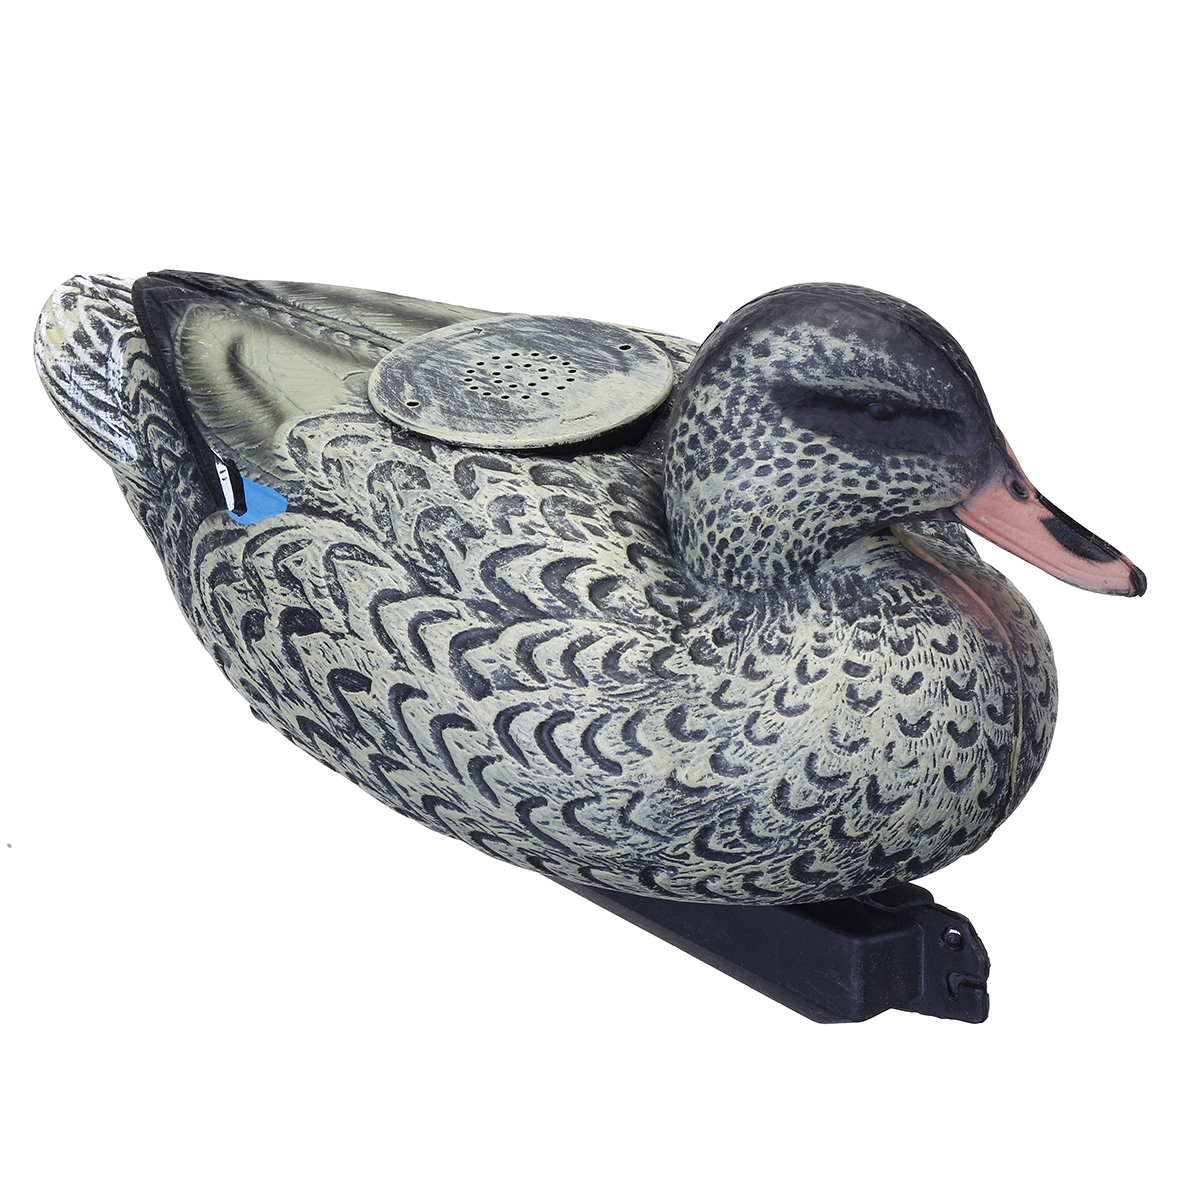 Floating-Duck-Hunting-Decoy-Mallar-For-Fishing-Lure-Hen-Garden-Pool-Decorations-1582099-4